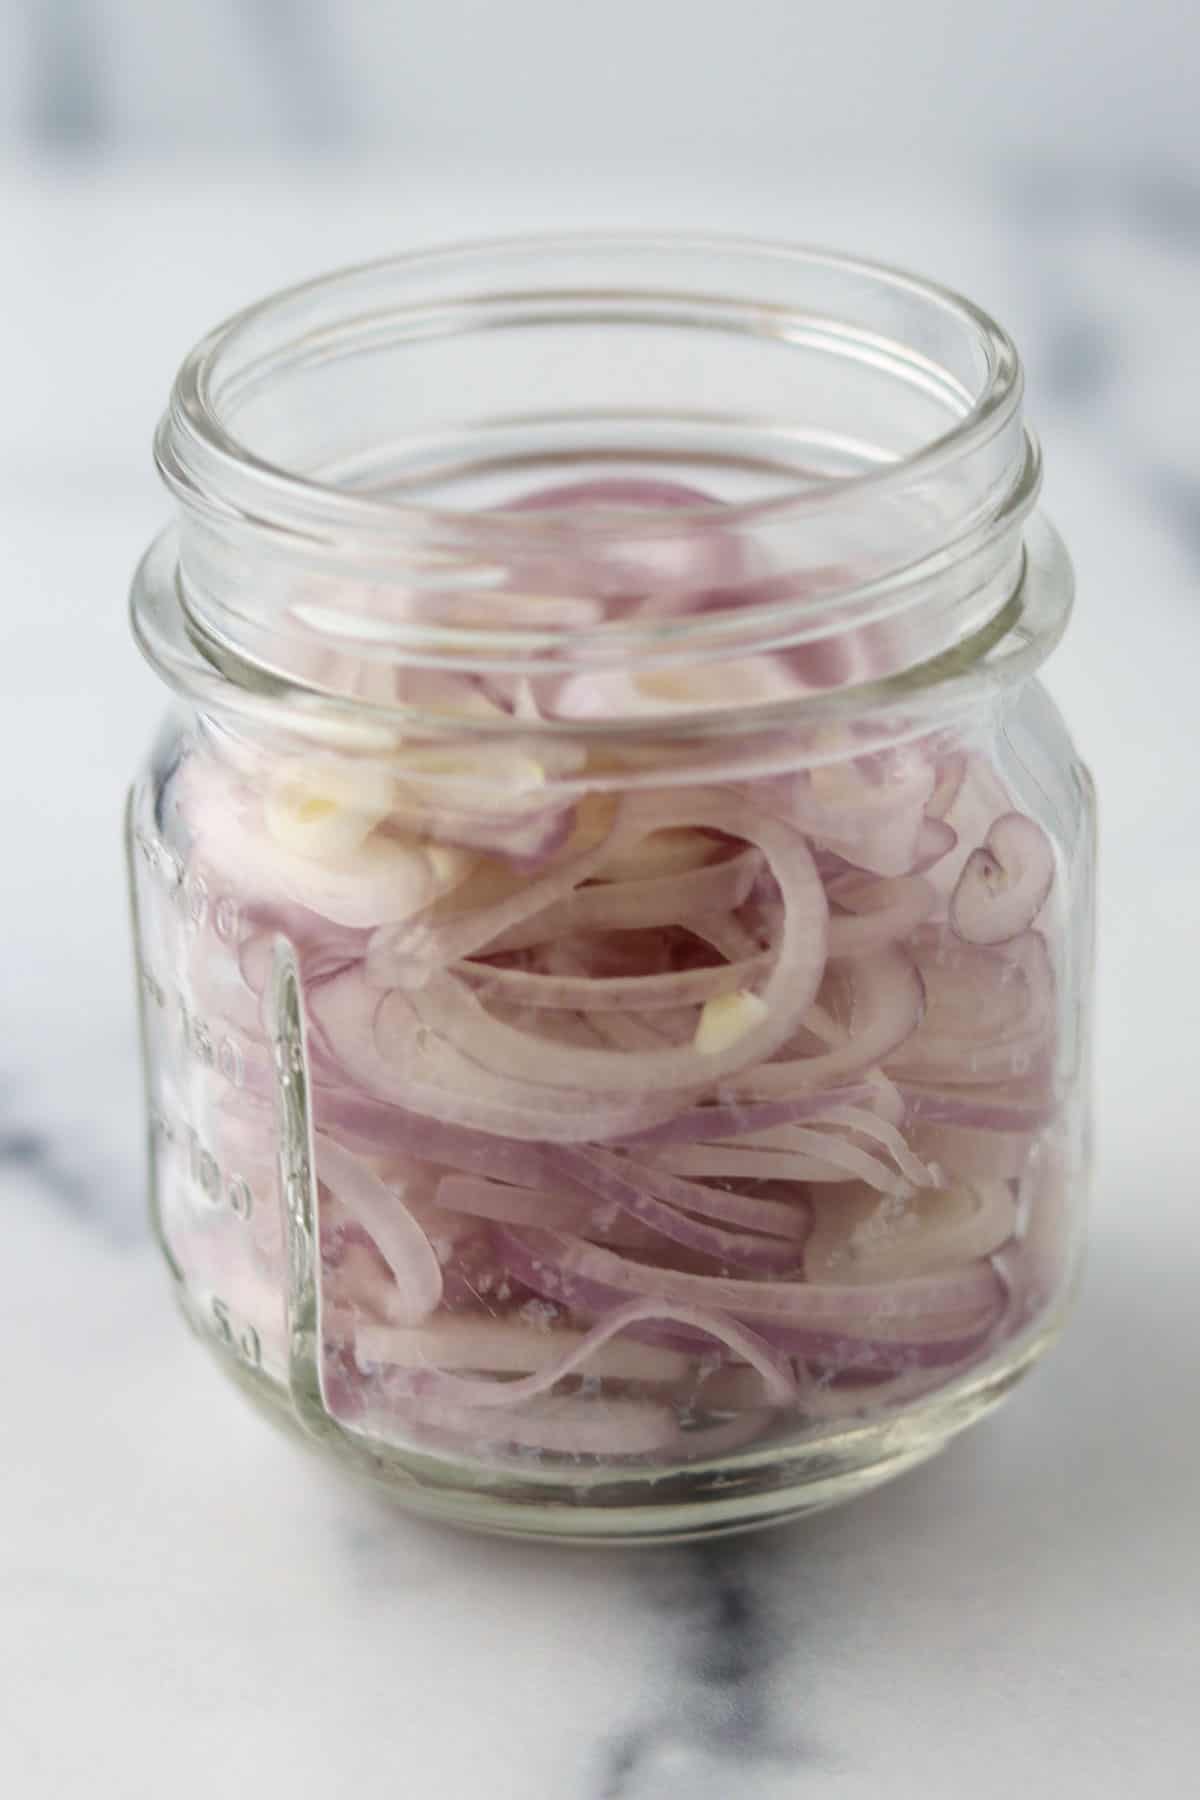 Cut up shallot rings in a glass jar.